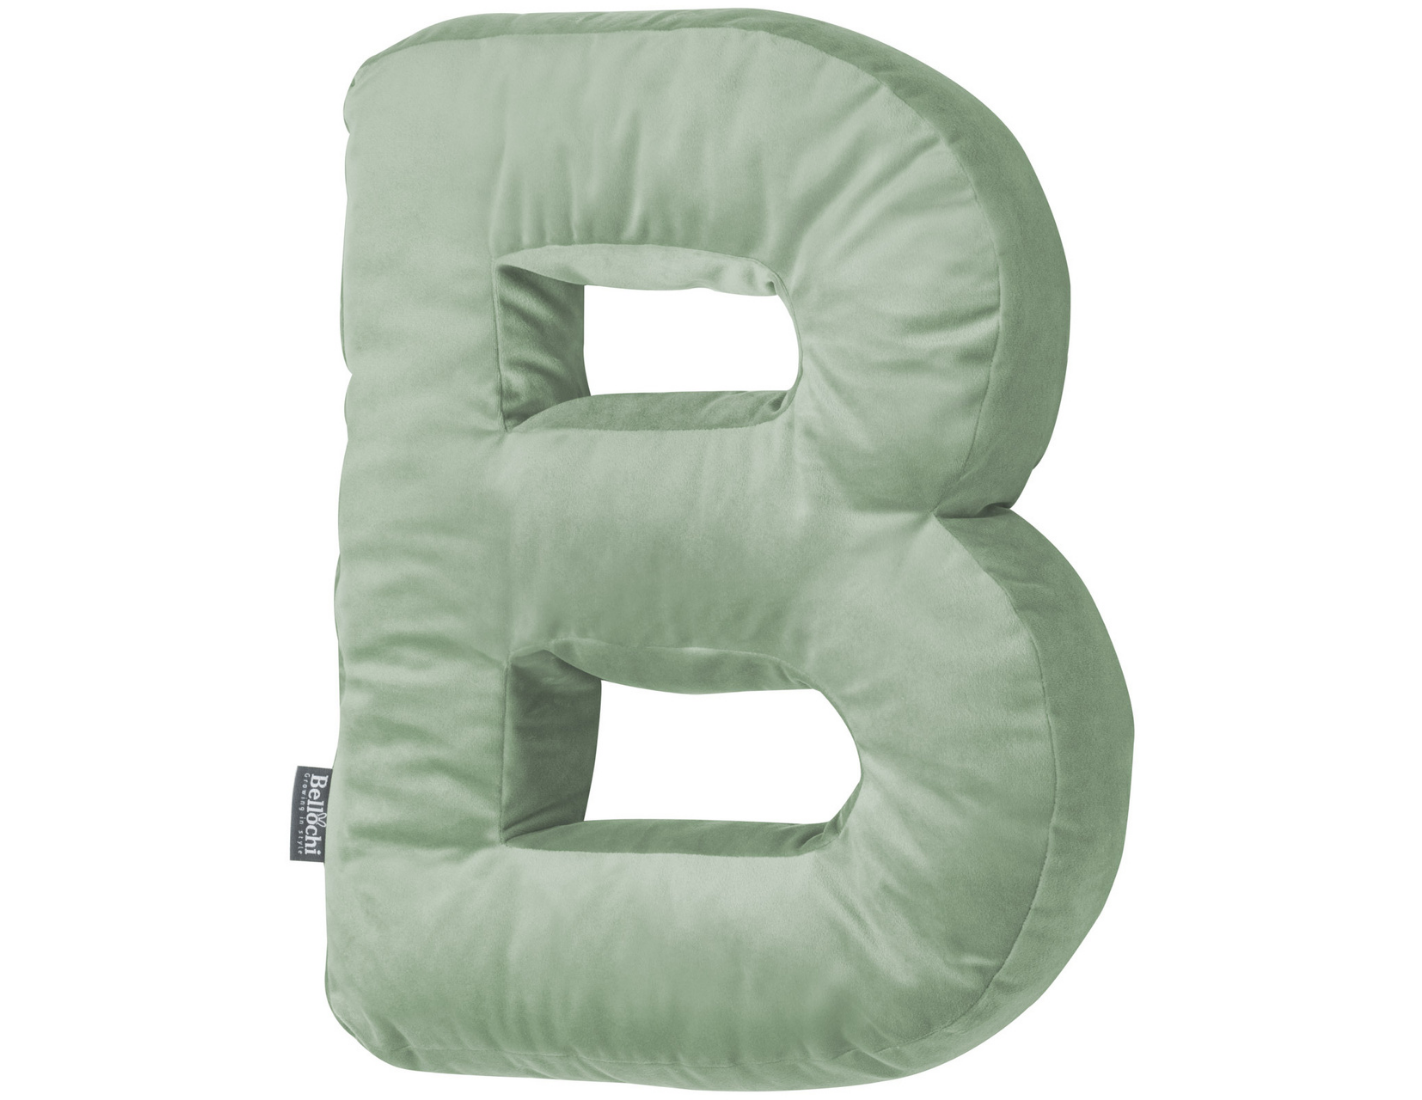 Decorative pillow in the shape of a letter ‘B’, olive